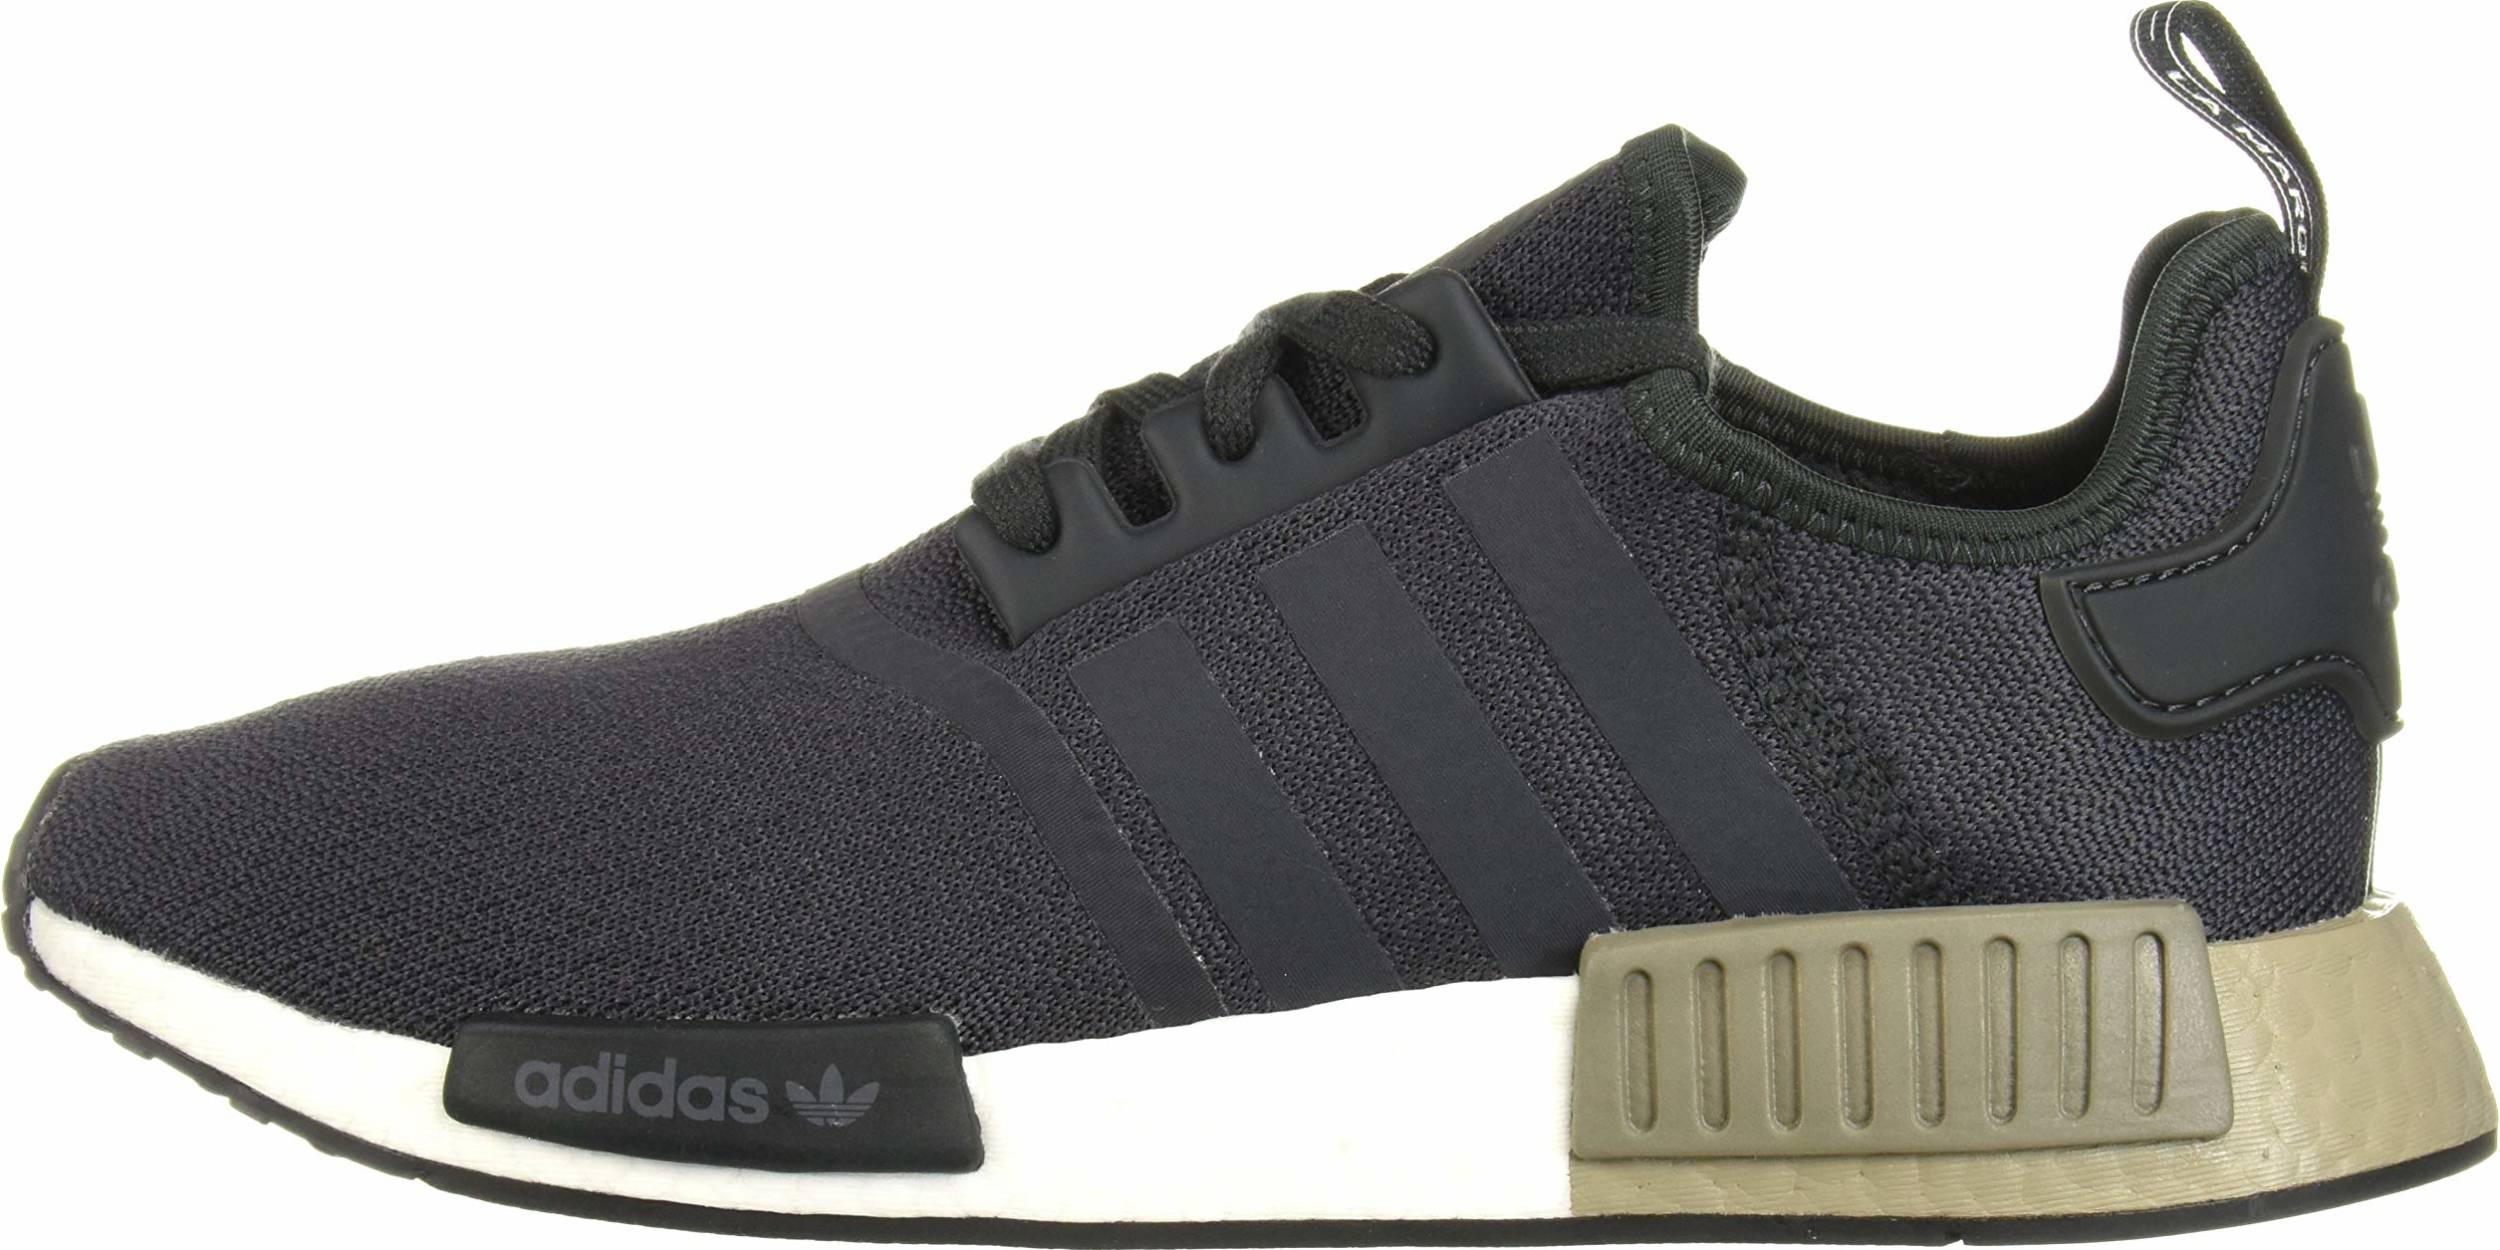 adidas nmd what does nmd stand for